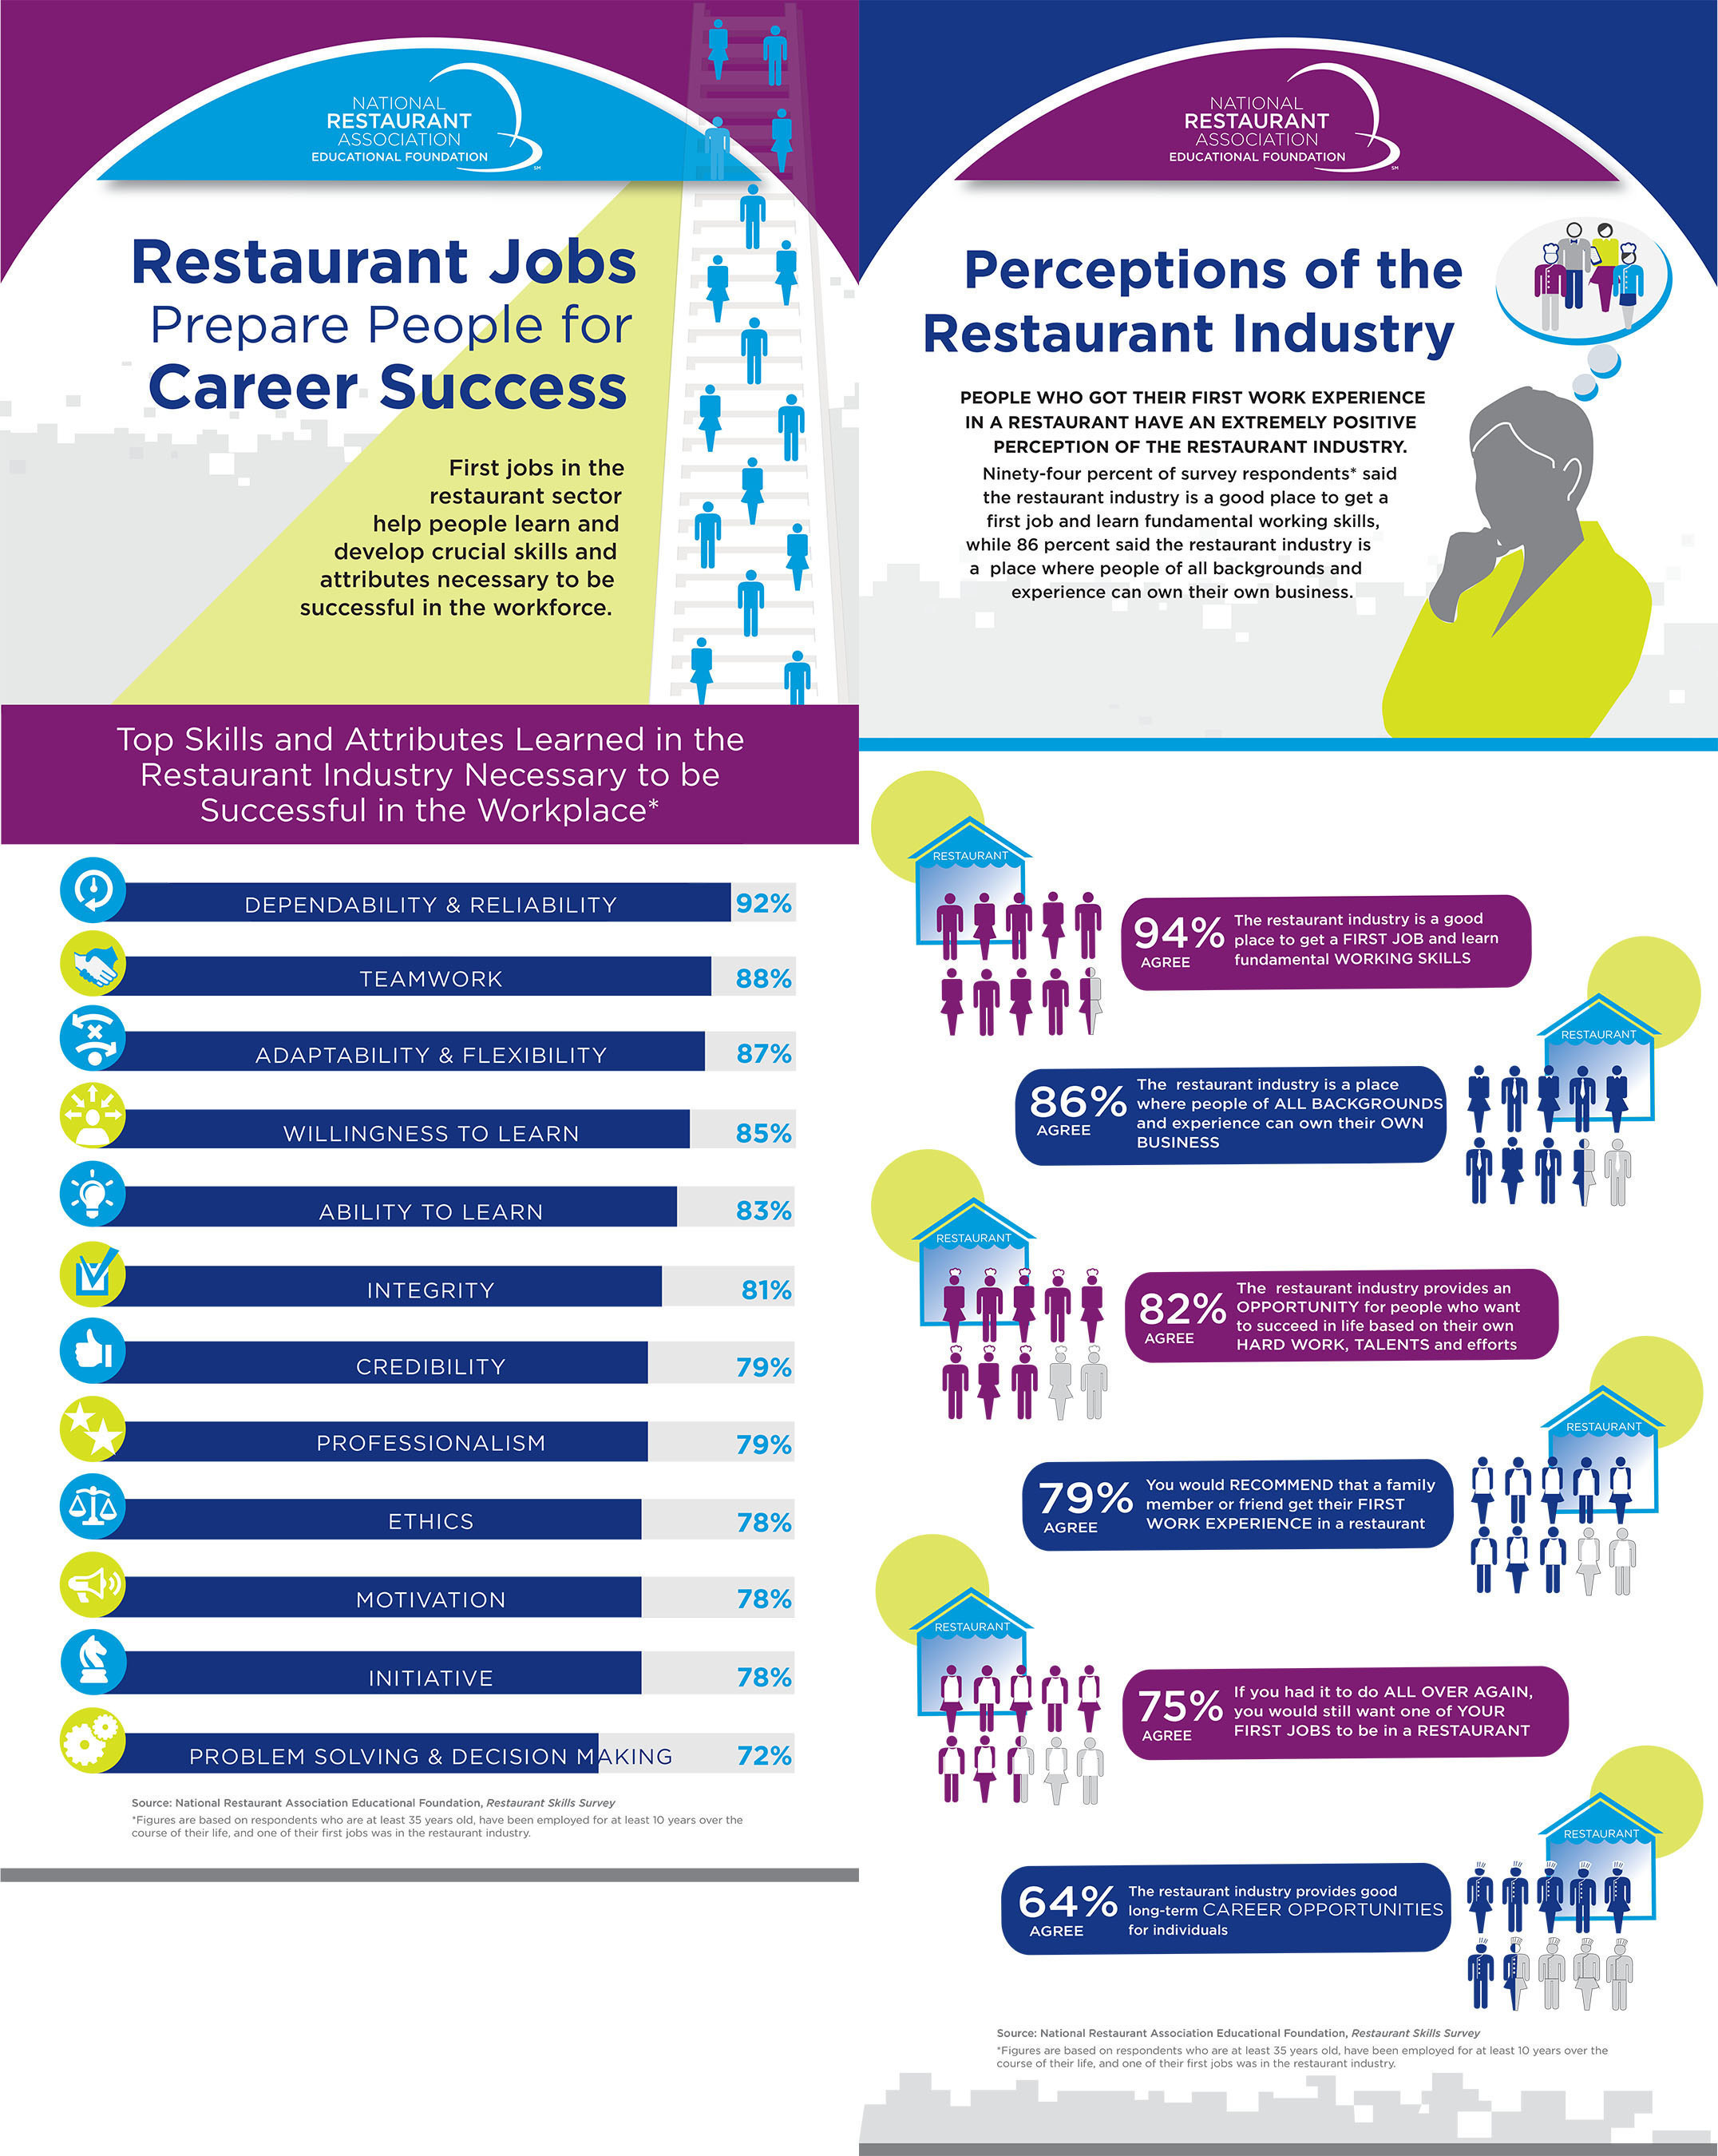 Research completed by the National Restaurant Association Educational Foundation shows that first jobs in the restaurant sector help people learn and develop crucial skills and attributes necessary to be successful in the workforce.